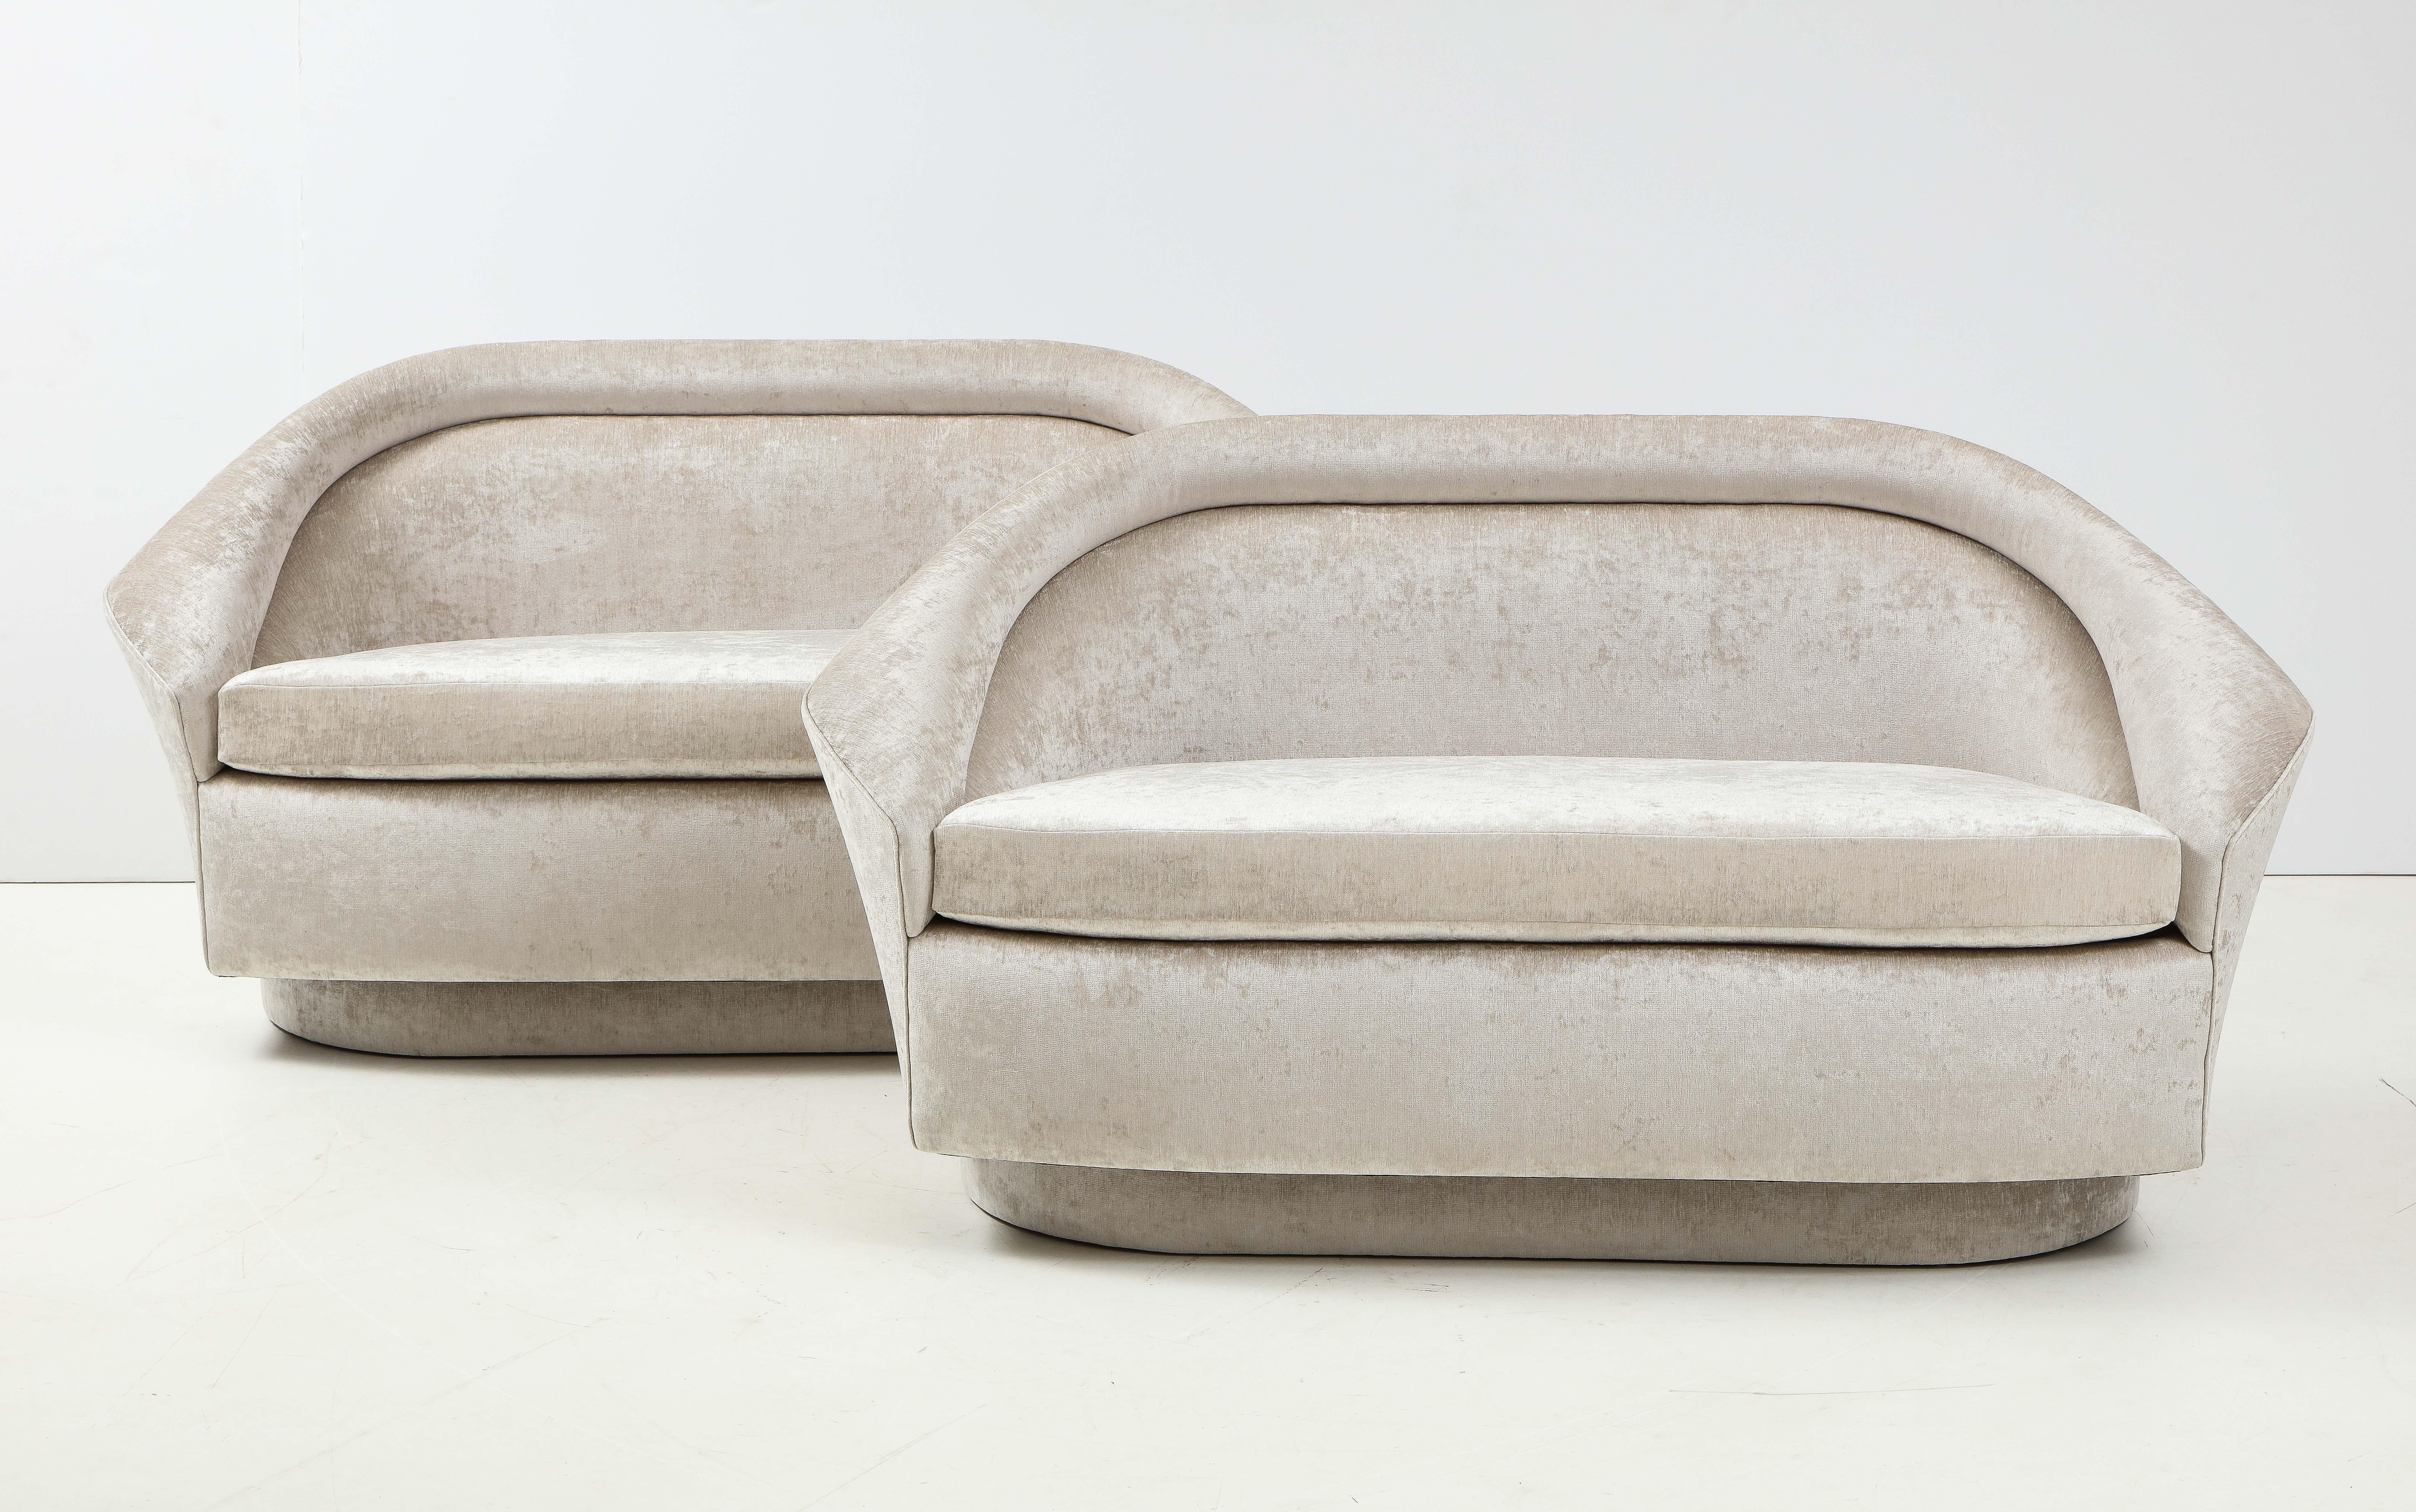 Pair of 1970's Settee's by Adrian Pearsall.
Sculptural pair of elegant settee's that have been Newly reupholstered
in a Luxurious chenille fabric that is very durable. 
 